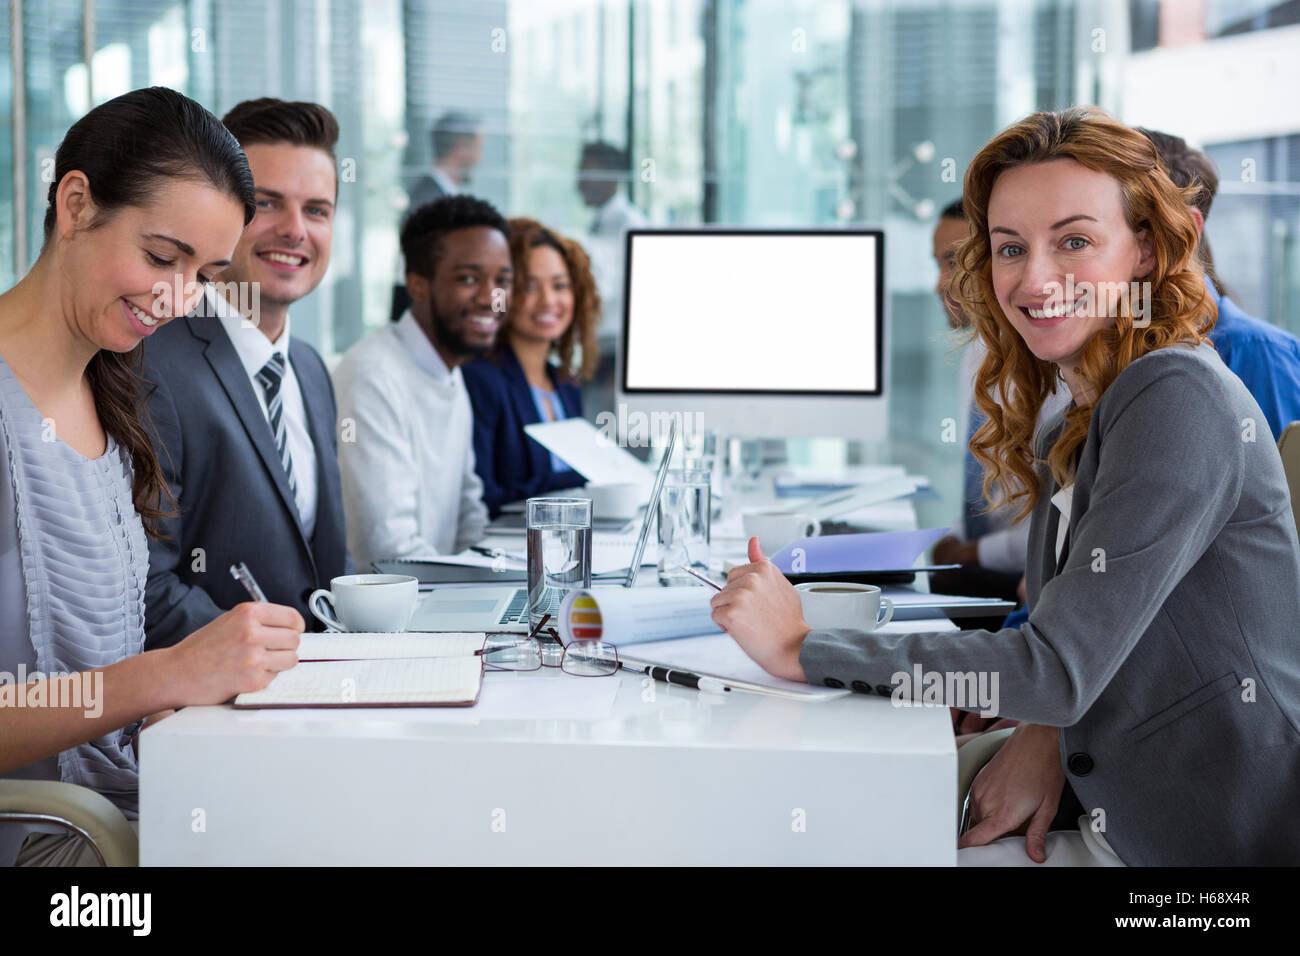 Portrait of businesspeople during video conference Stock Photo